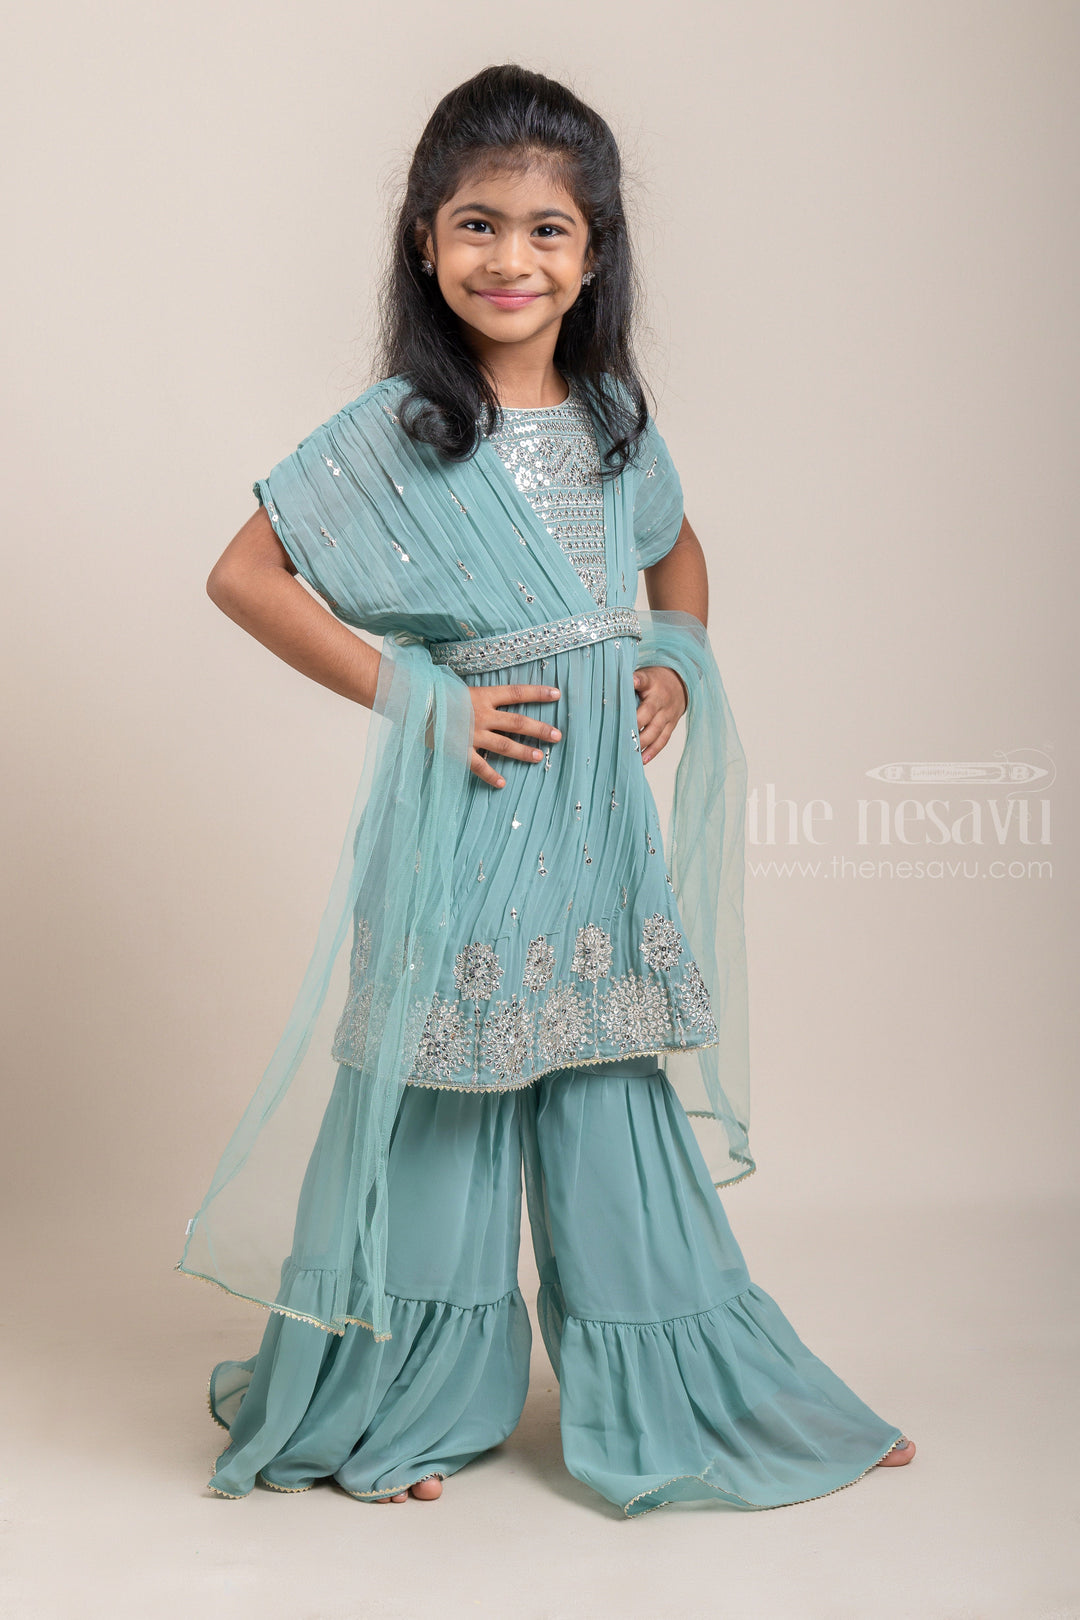 The Nesavu Sets & Suits Glitter Sequin Embroidered Flared Green Kurti and Palazzo Suit for Girls with Organza Dupatta psr silks Nesavu